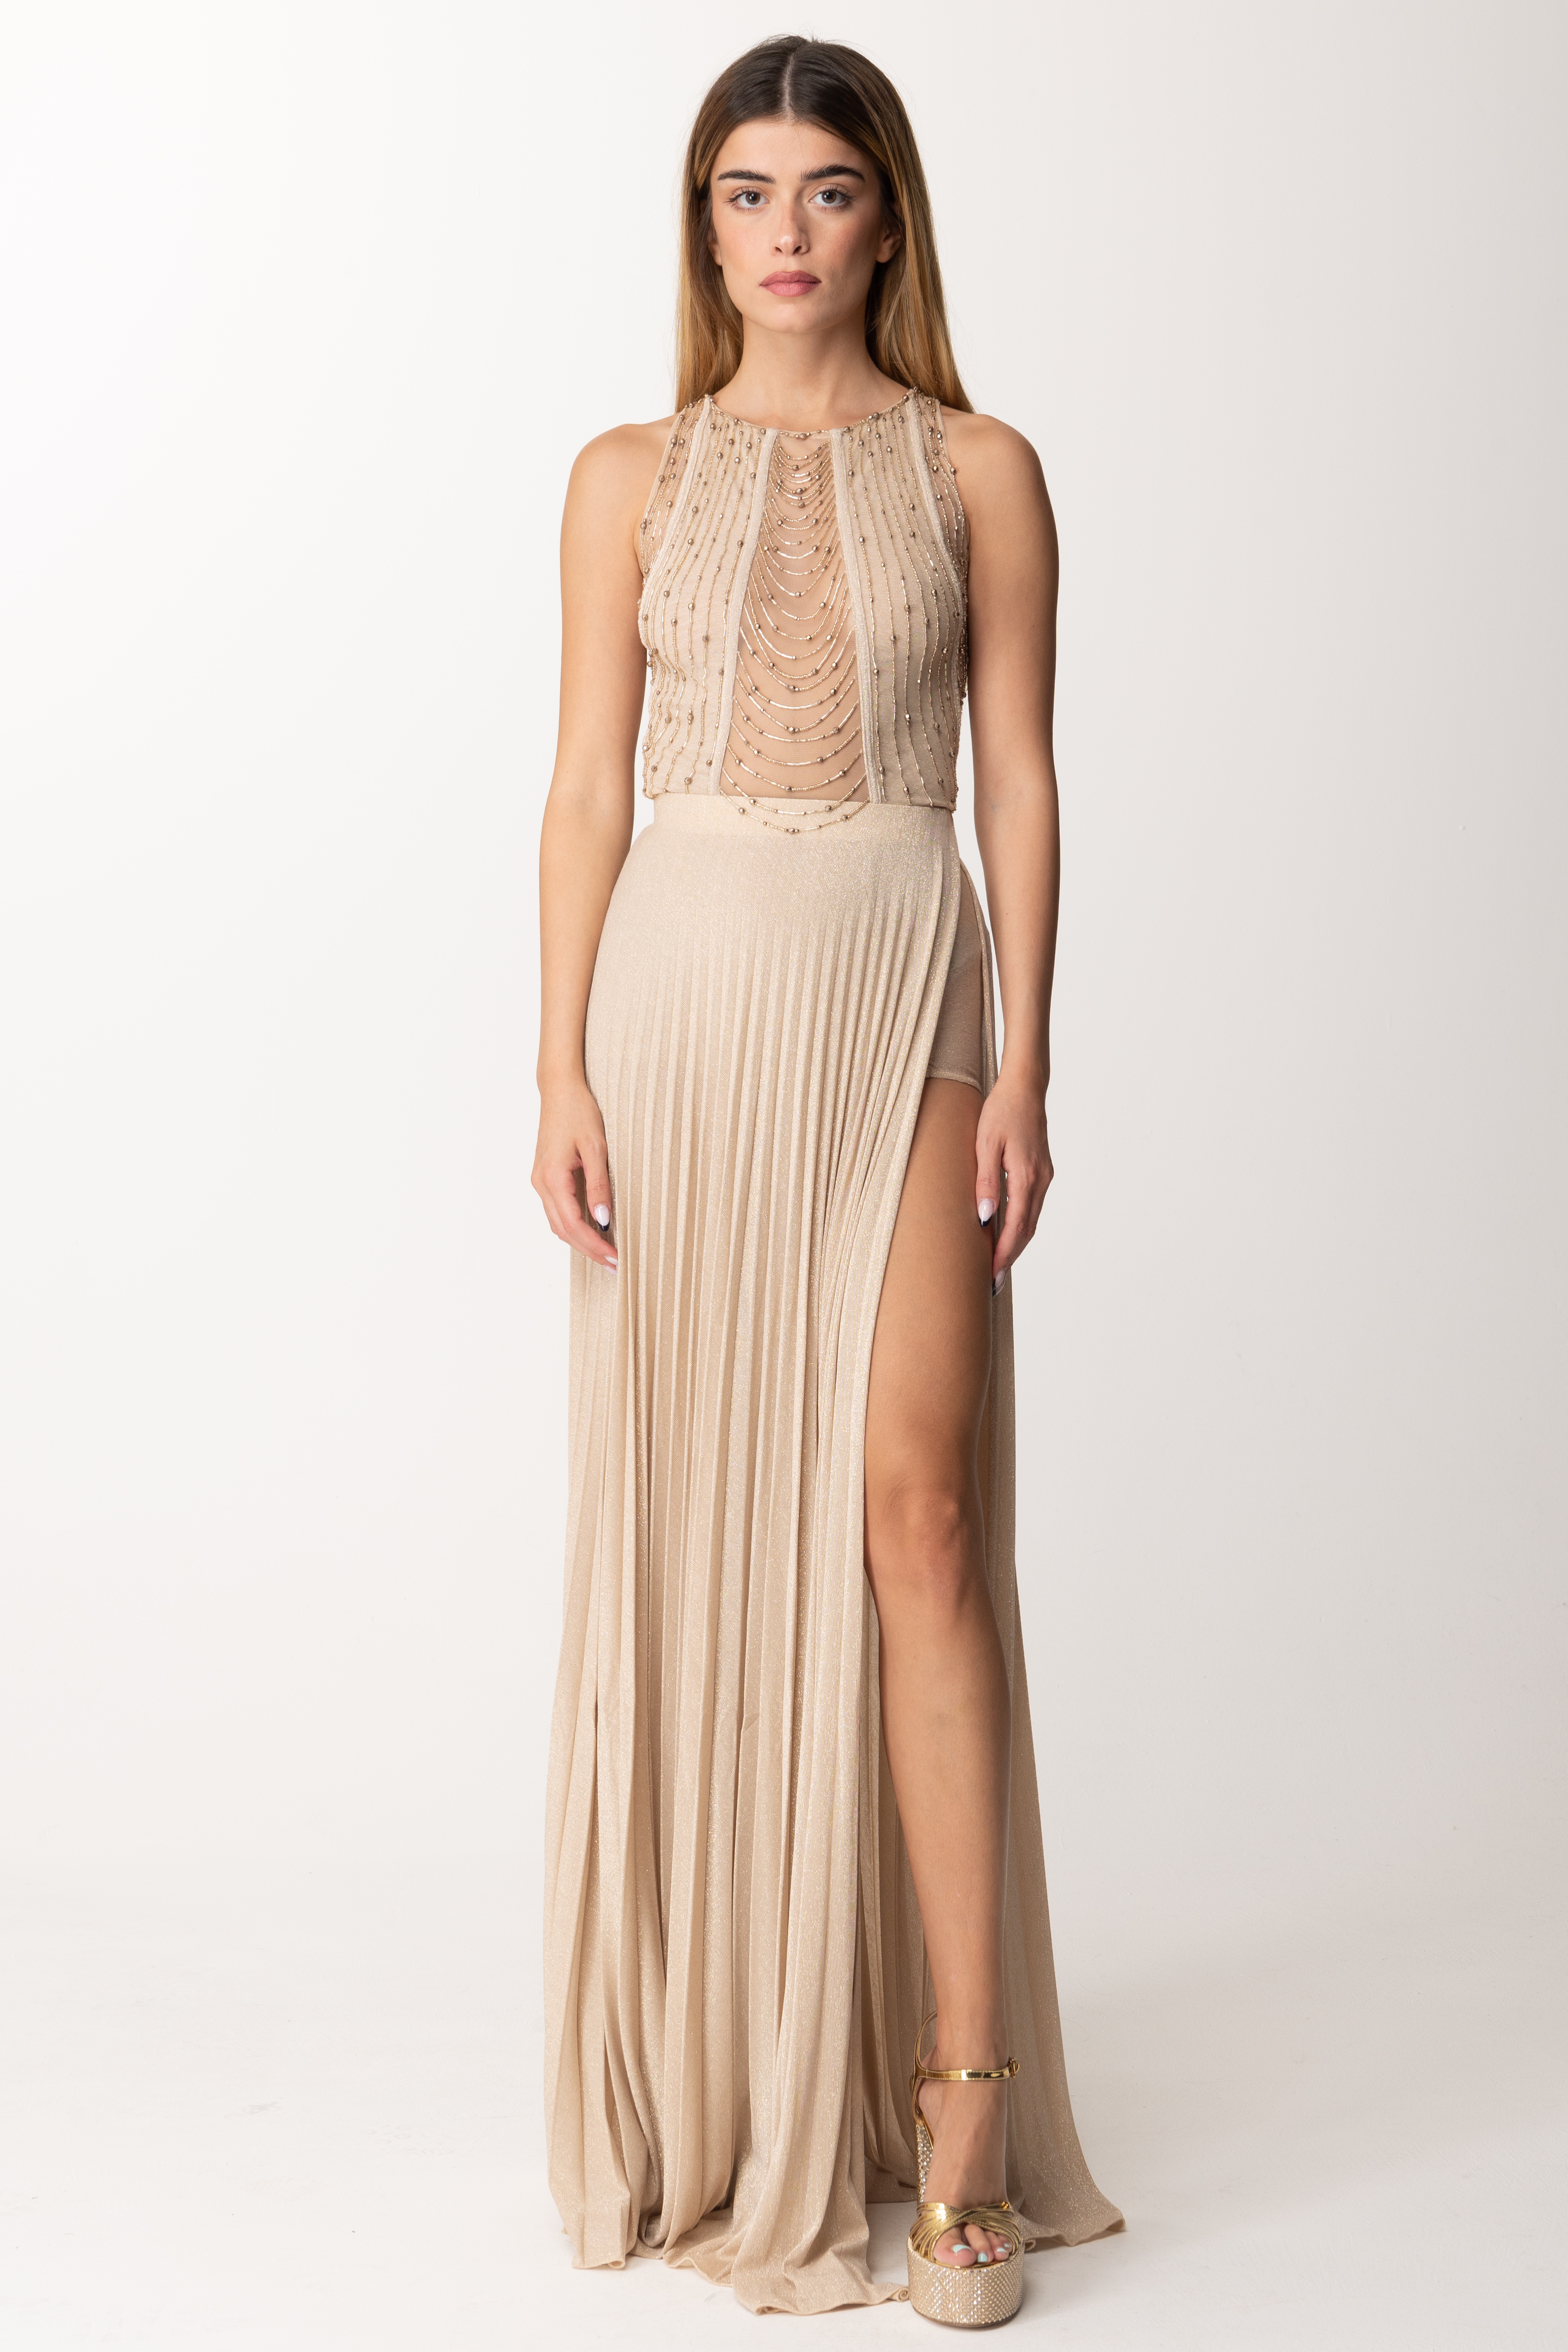 Preview: Elisabetta Franchi Red Carpet dress with pleated skirt Oro